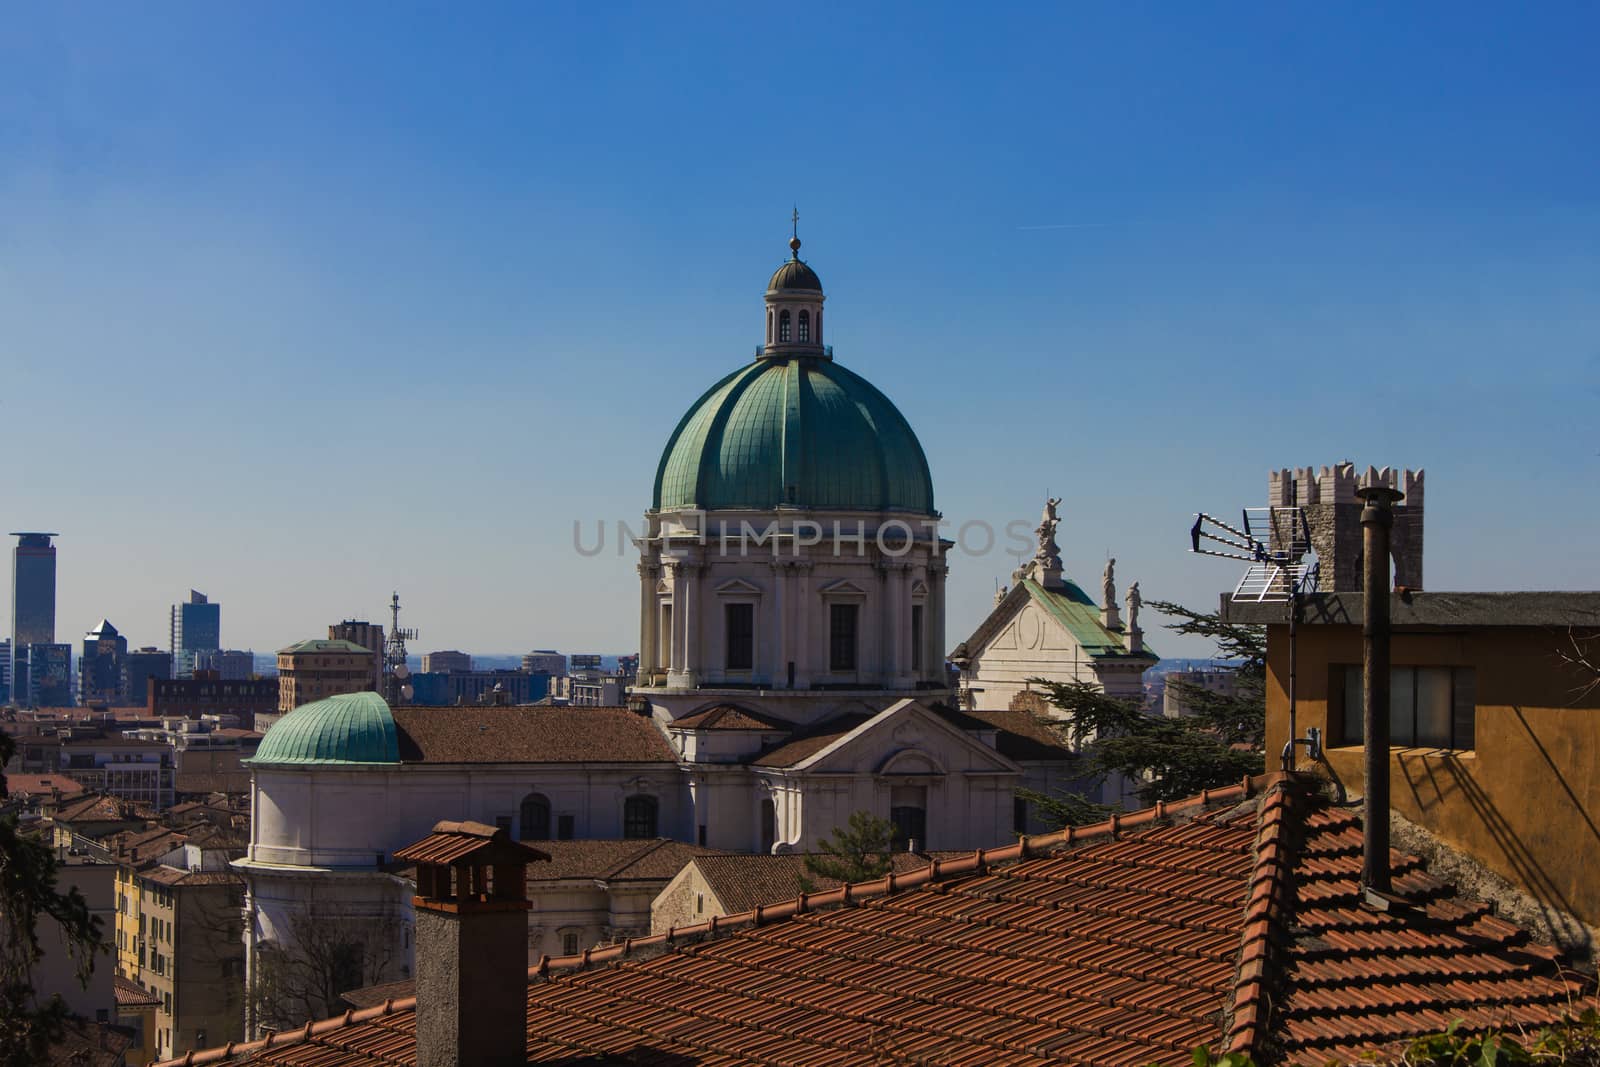 The Duomo Nuovo or New Cathedral is the largest Roman Catholic church in Brescia, Italy